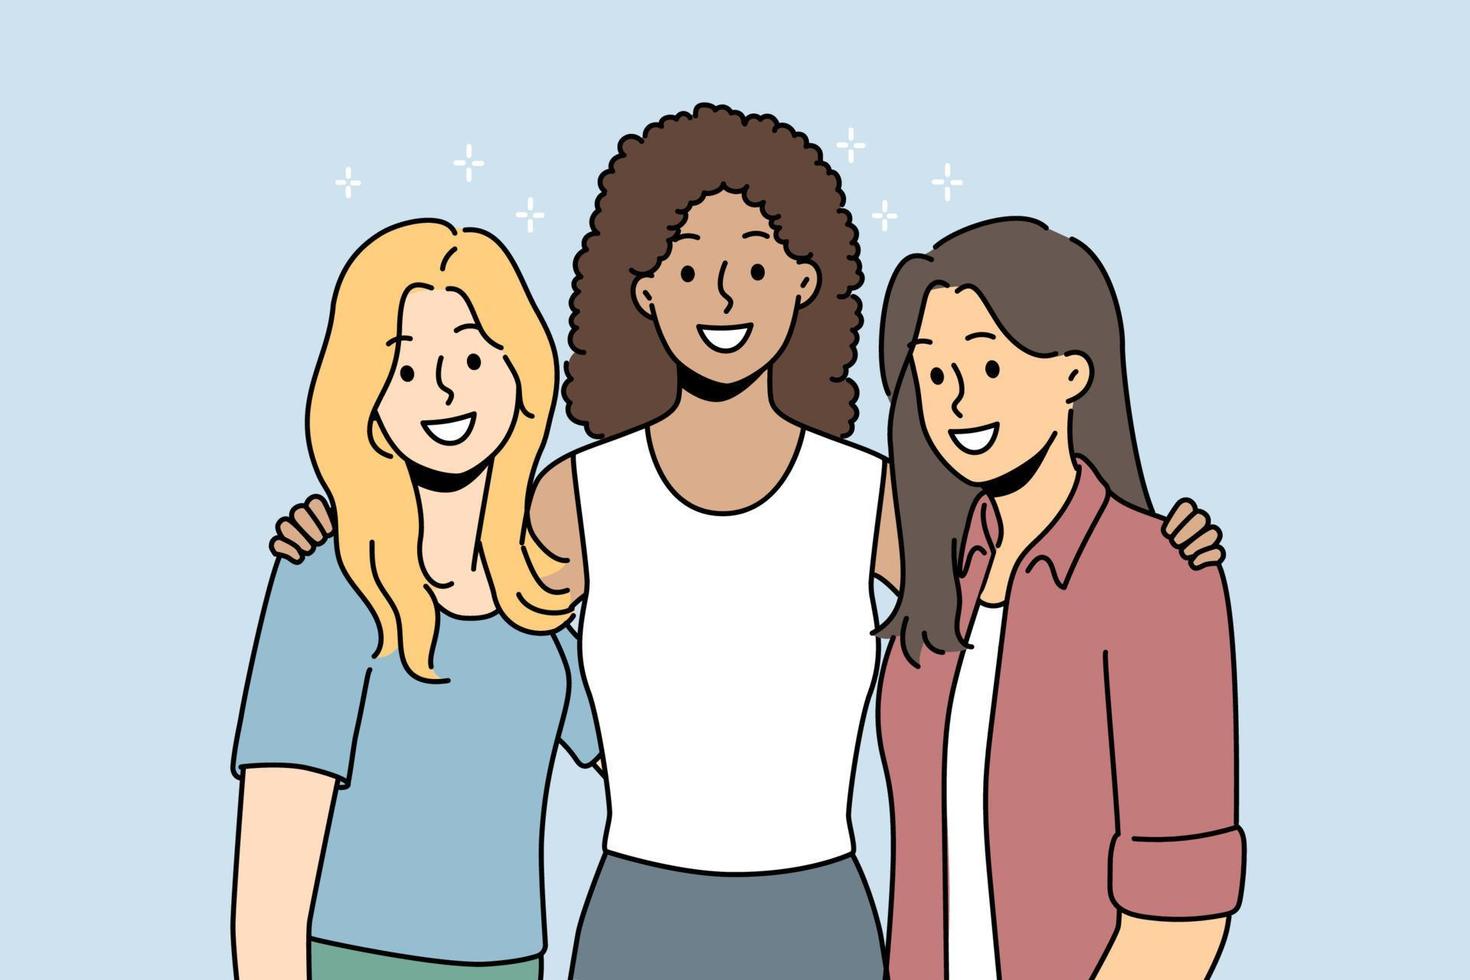 Smiling diverse girls standing together hugging showing friendship and support. Happy multiethnic interracial women posing embracing. Vector illustration.